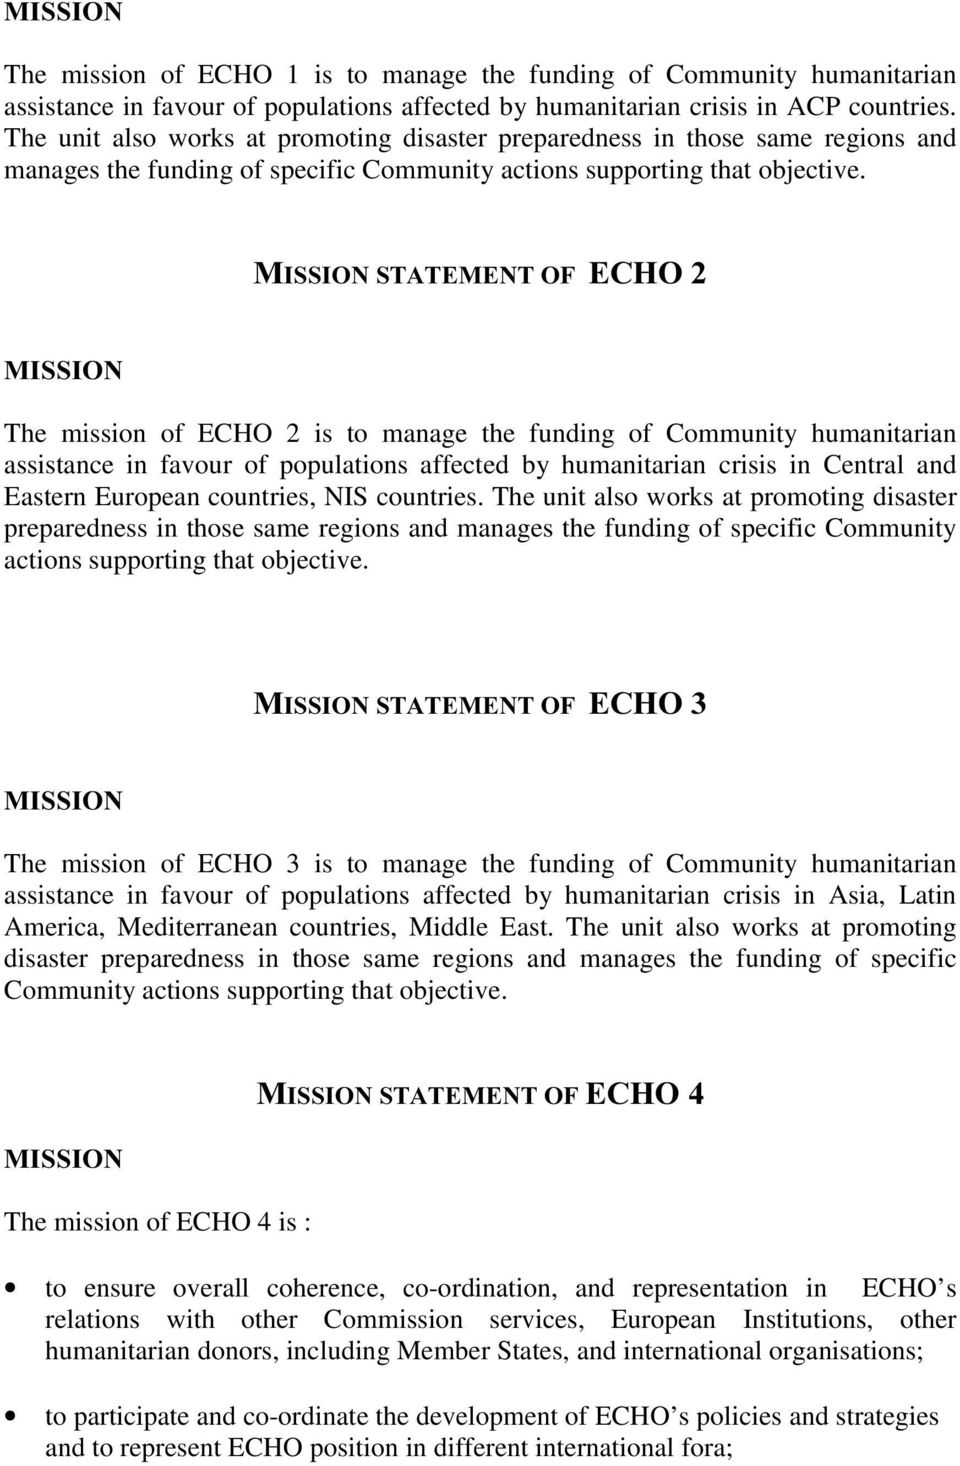 The mission of ECHO 2 is to manage the funding of Community humanitarian assistance in favour of populations affected by humanitarian crisis in Central and Eastern European countries, NIS countries.